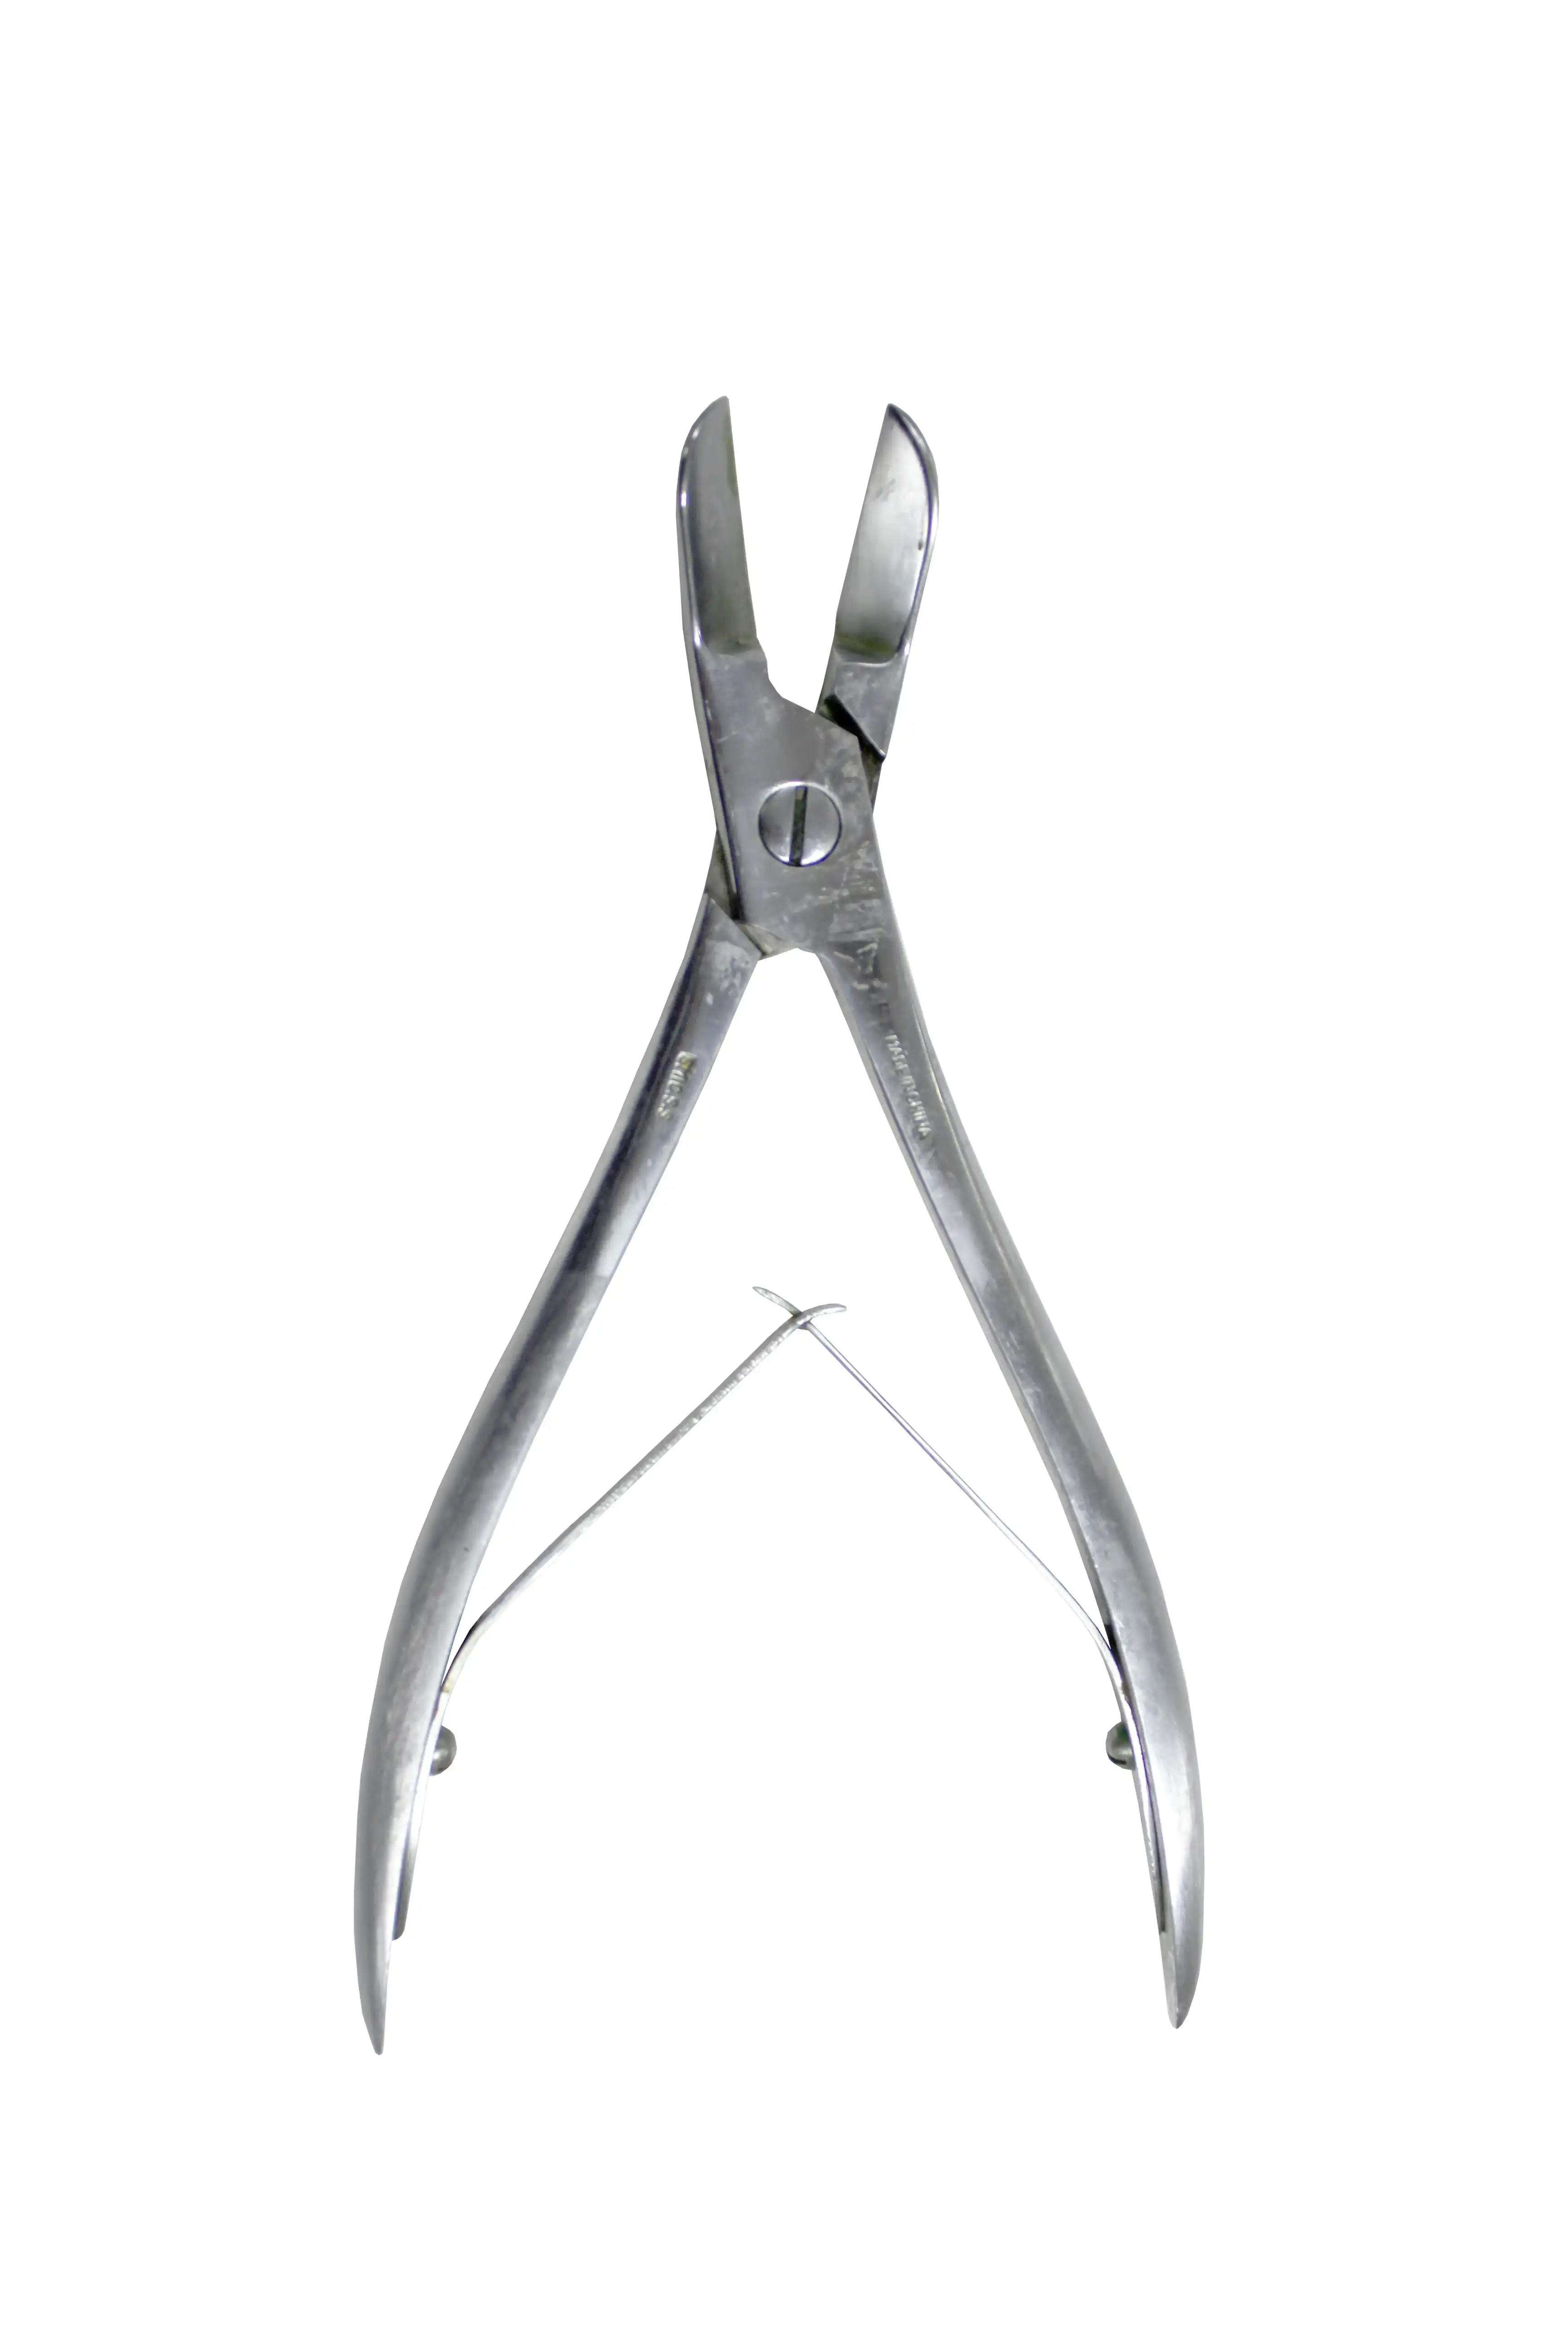 Livingstone Bone Cutter or Nail Clipper 180mm Long 26mm Straight Jaw Smooth Handle Two Arms 181g